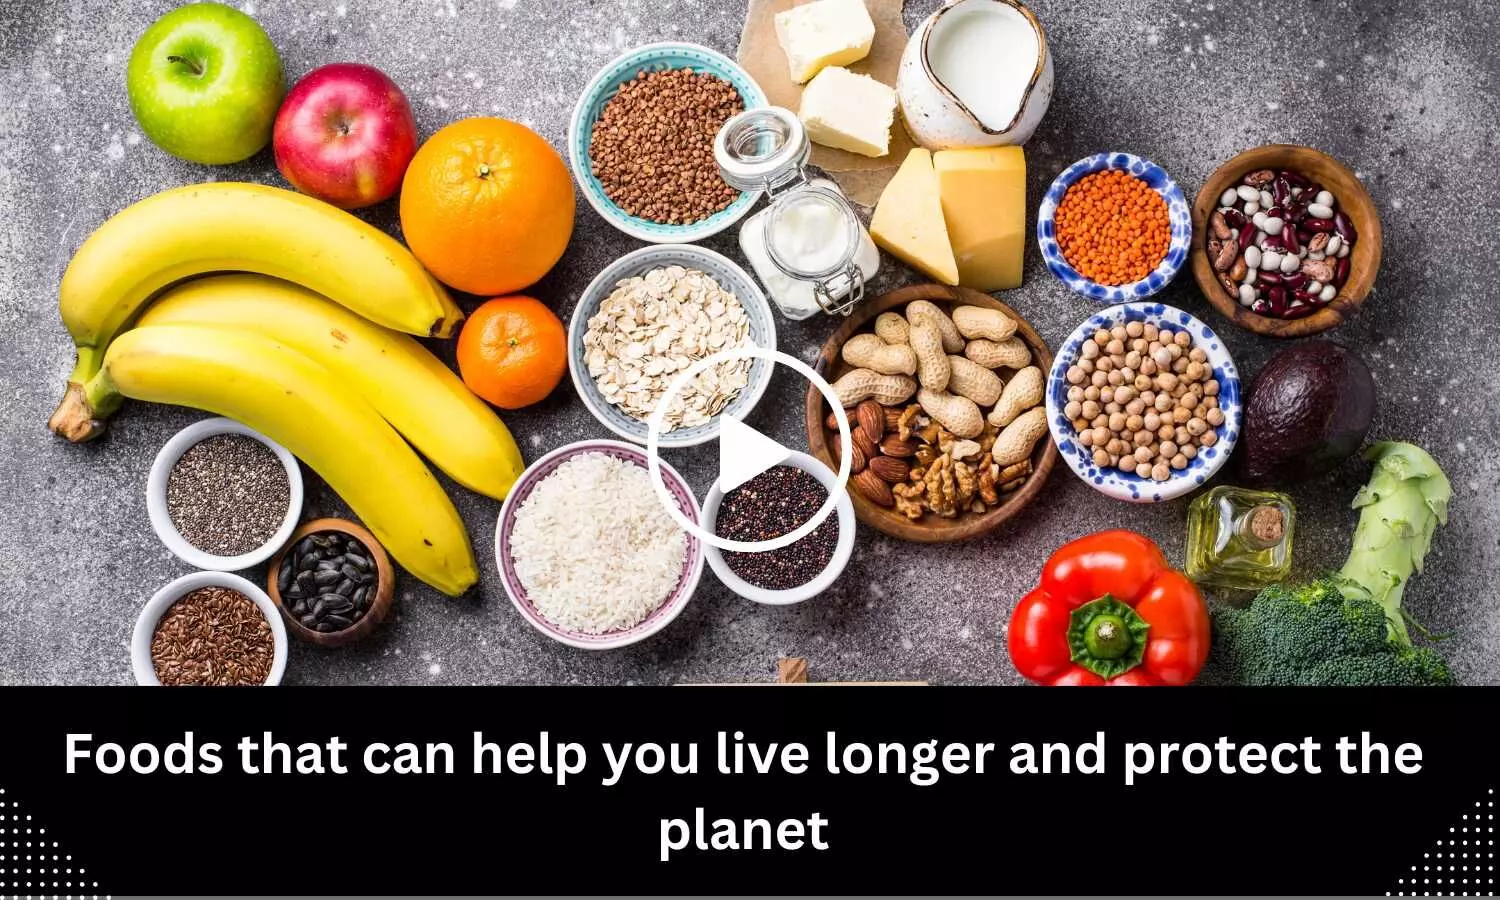 Foods that can help you live longer and protect the planet